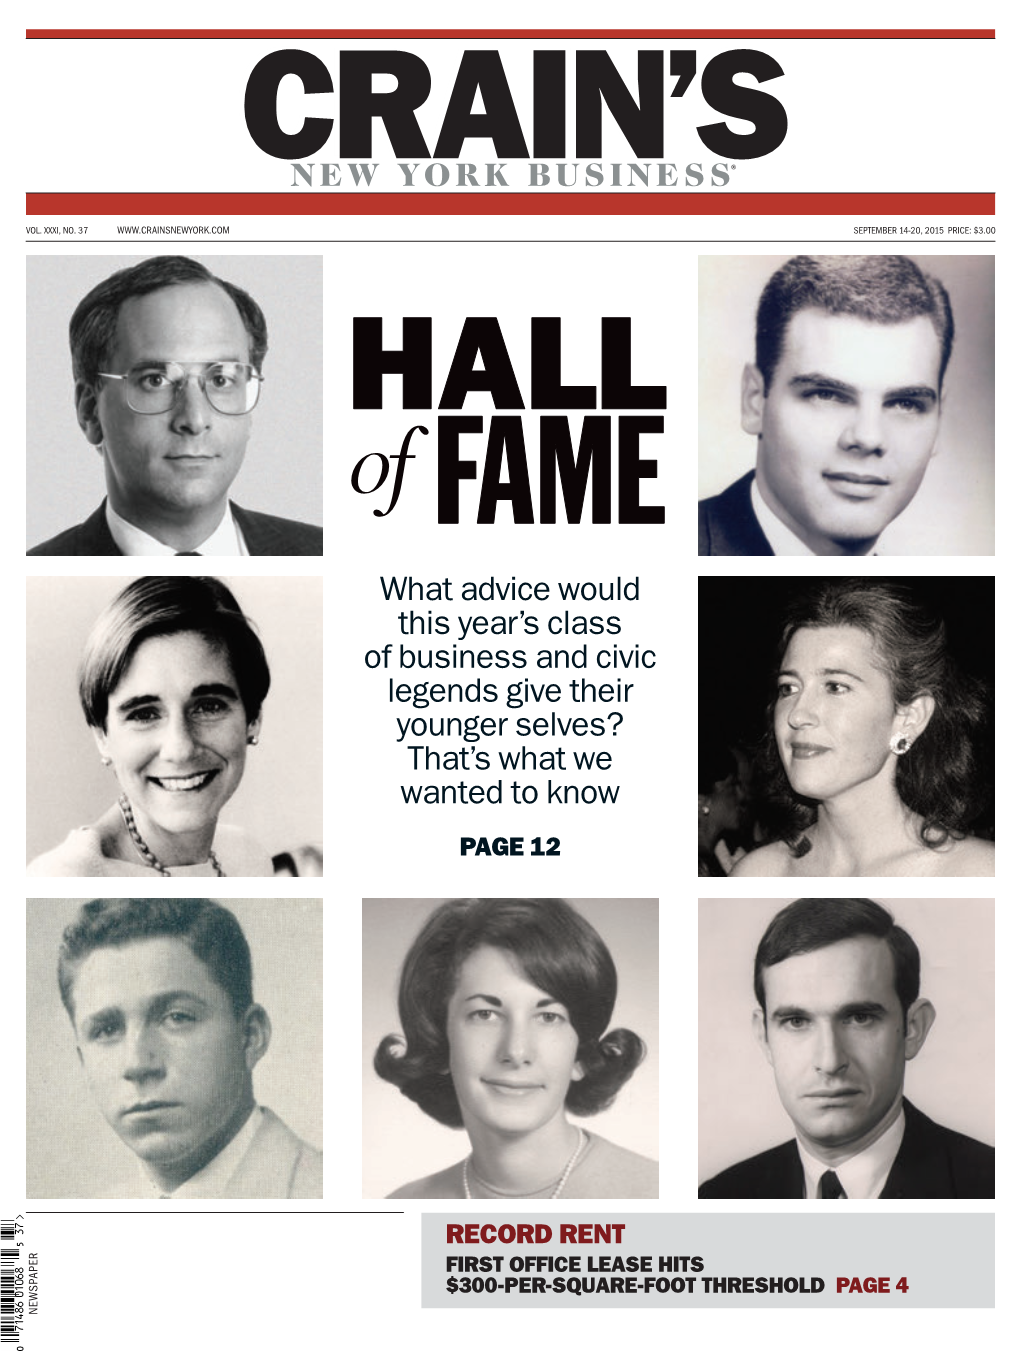 What Advice Would This Year's Class of Business and Civic Legends Give Their Younger Selves?